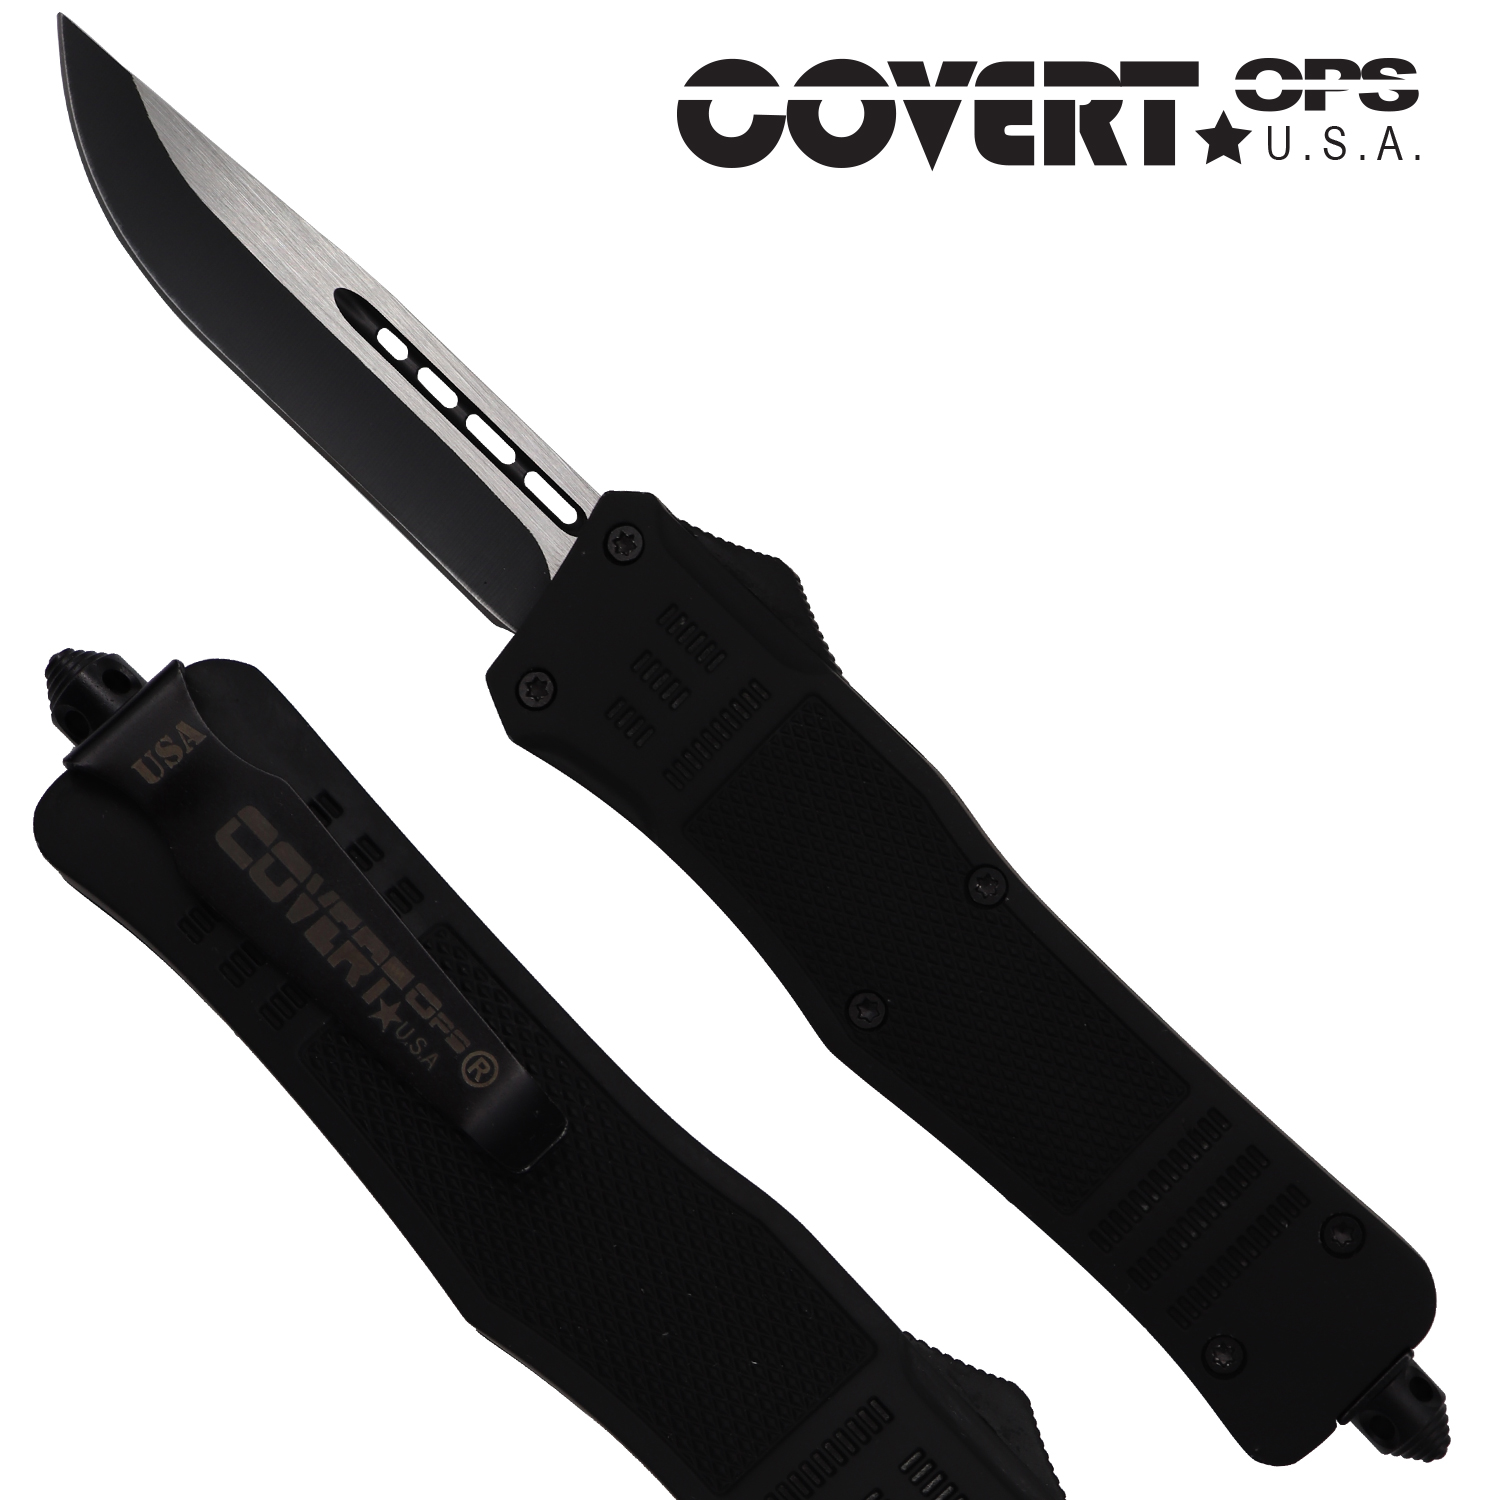 Covert OPS USA OTF Automatic Knife 9 inch overall Black Handle Two Tone Drop Point D2 Steel Blade